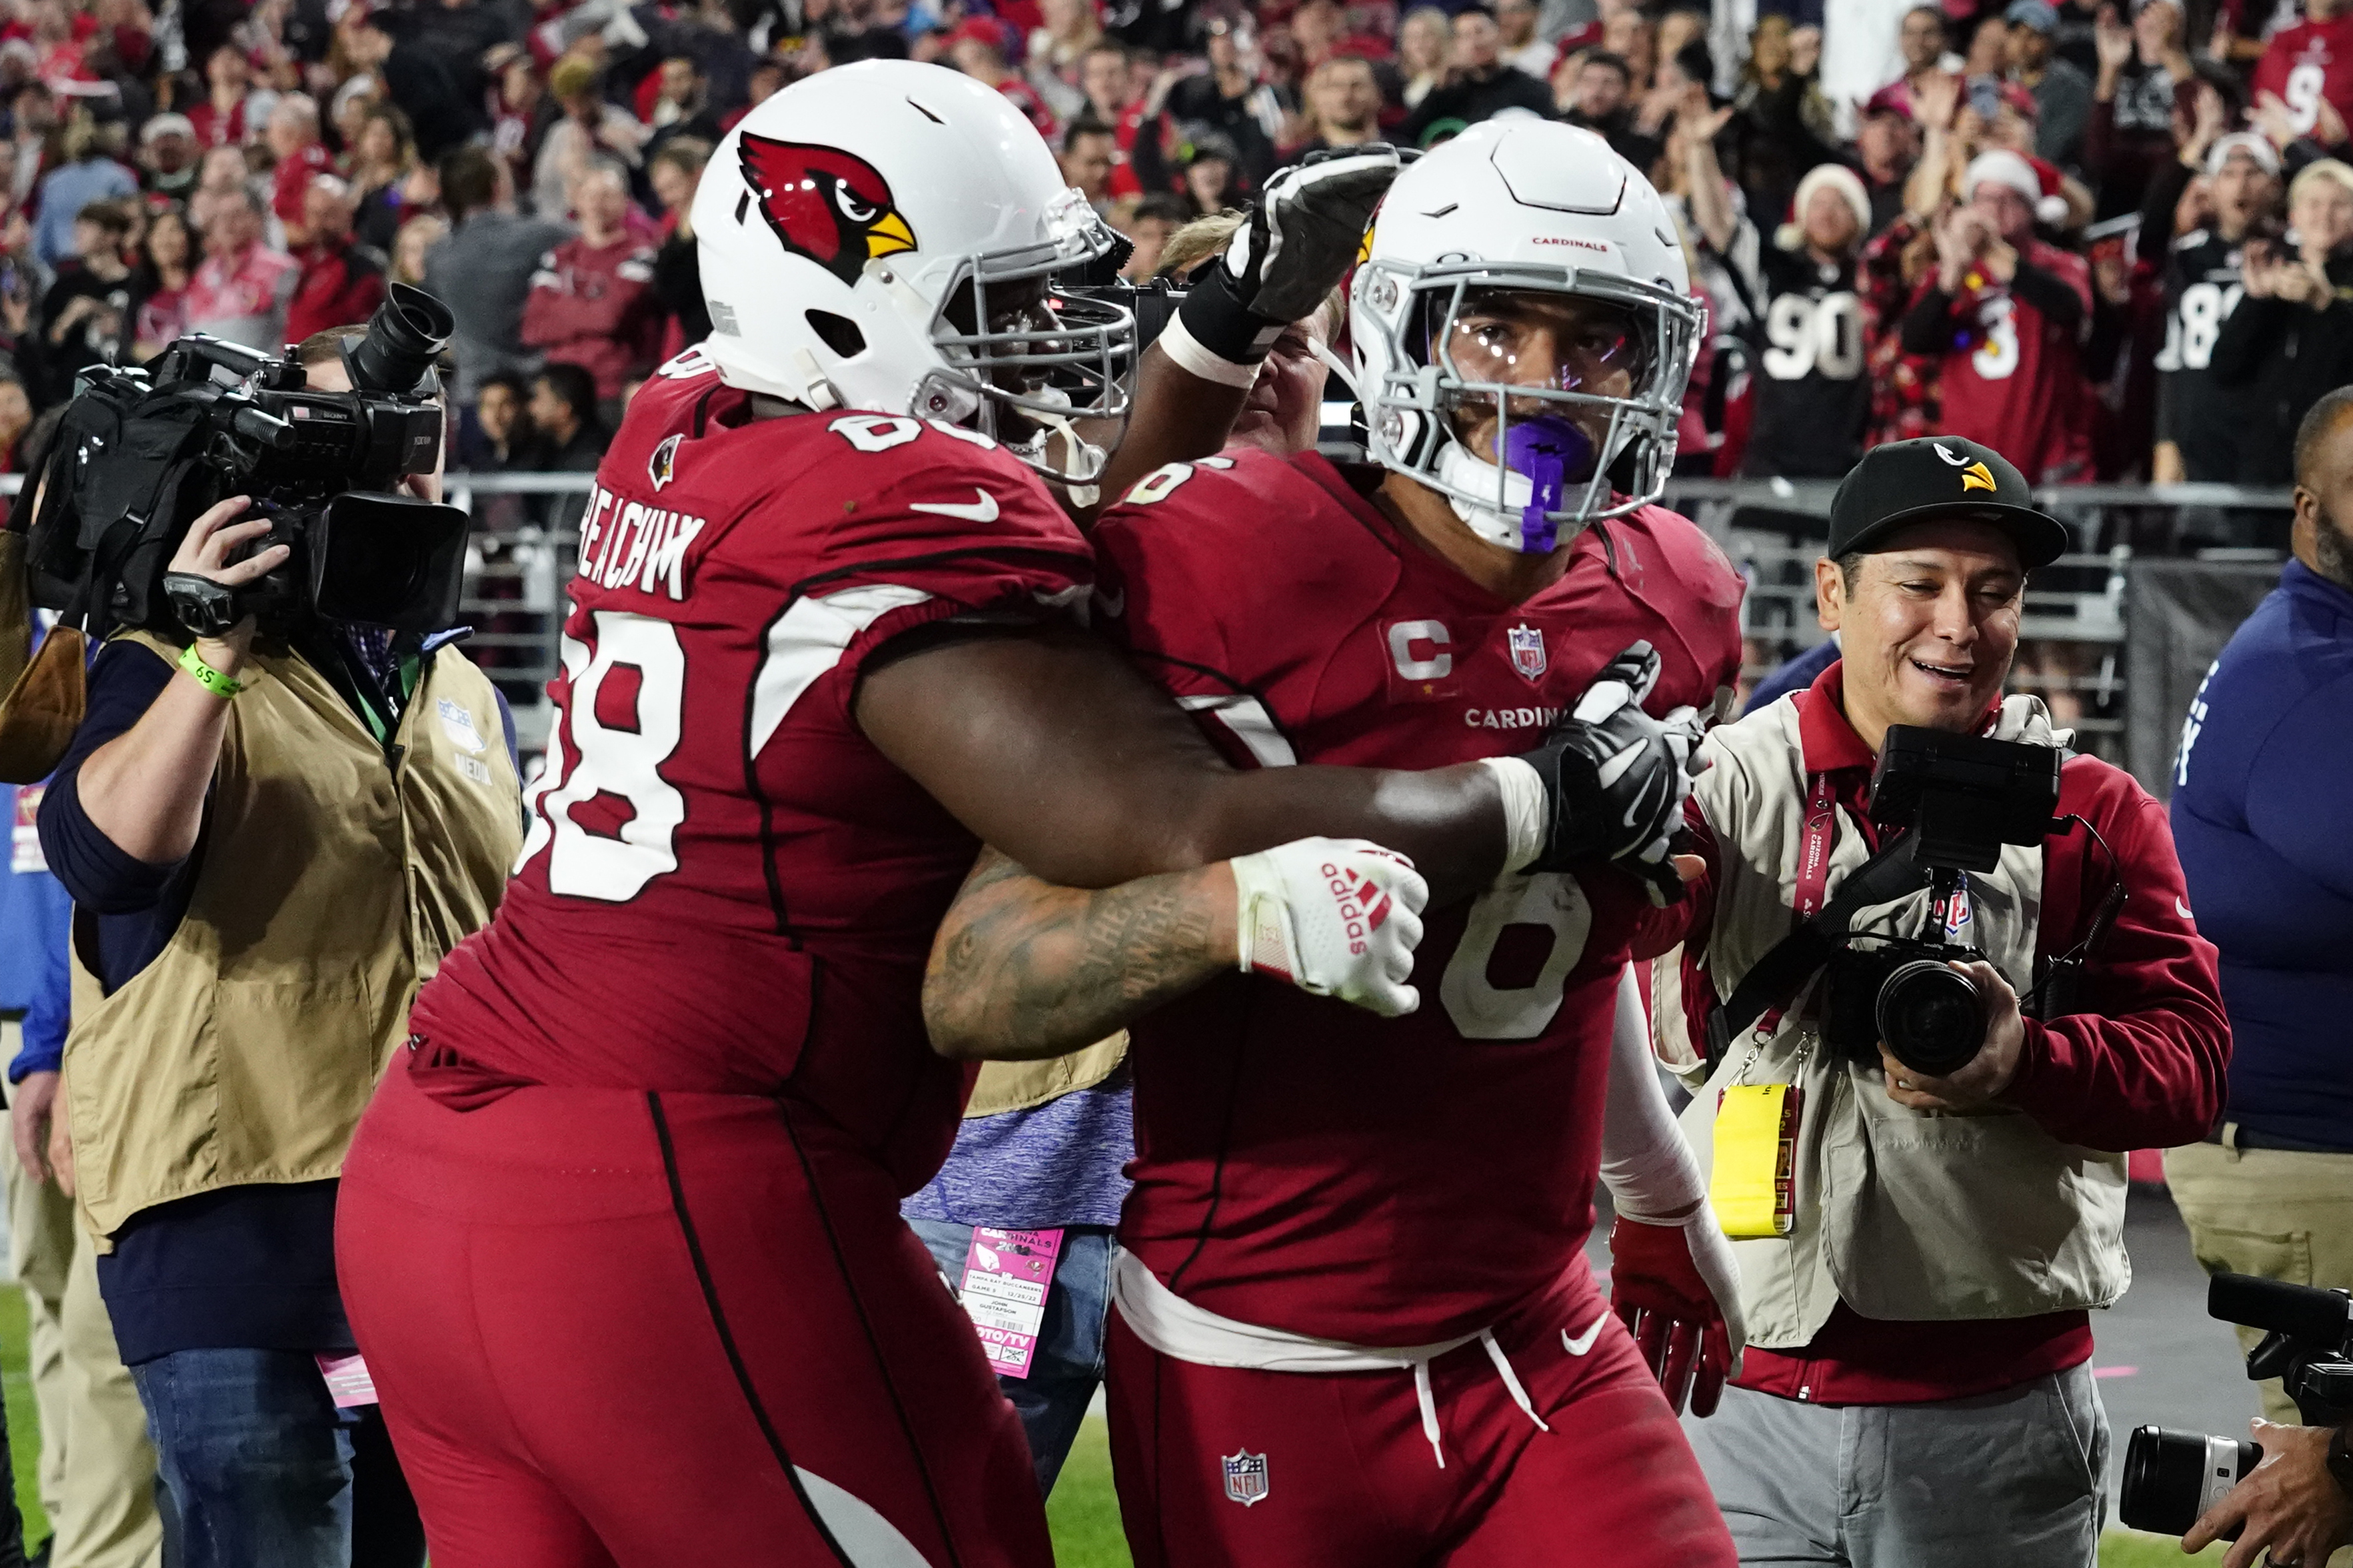 Cardinals lose to Tampa Bay Buccaneers during Christmas day game